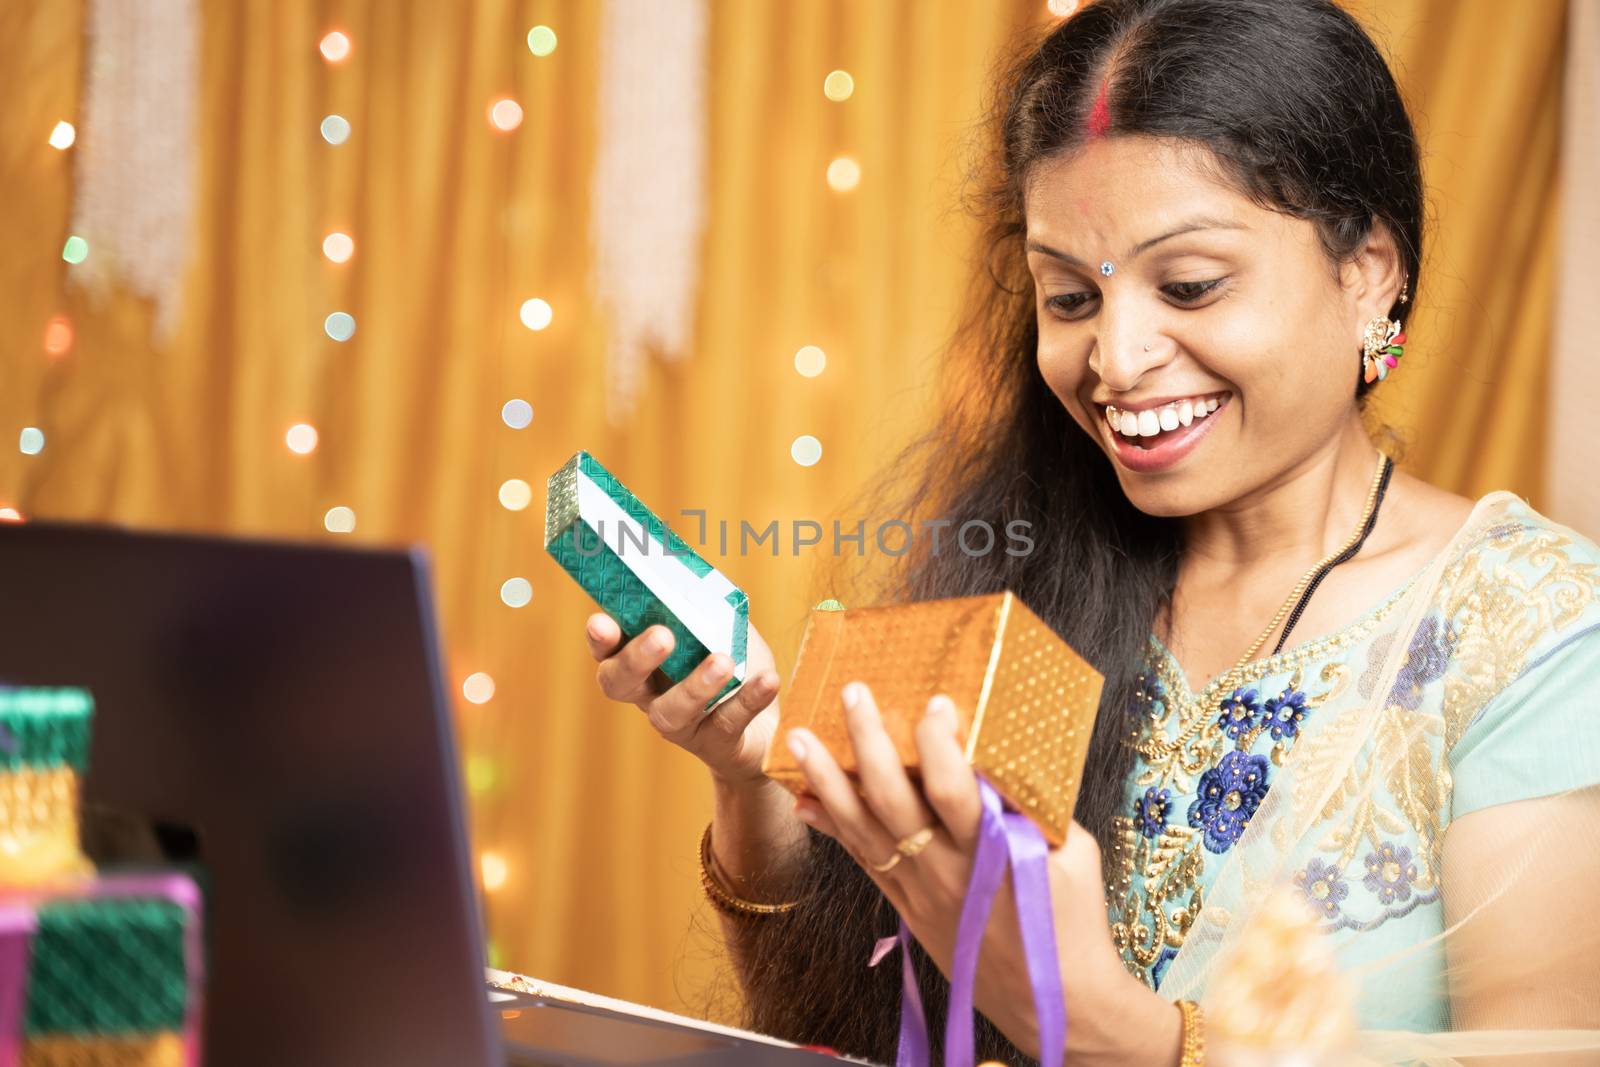 Happy excited Woman opening gift infront of laptop during video call or chat at Raksha Bandhan festival ceremony - Concept of distance relations, celebrations and lifestyle